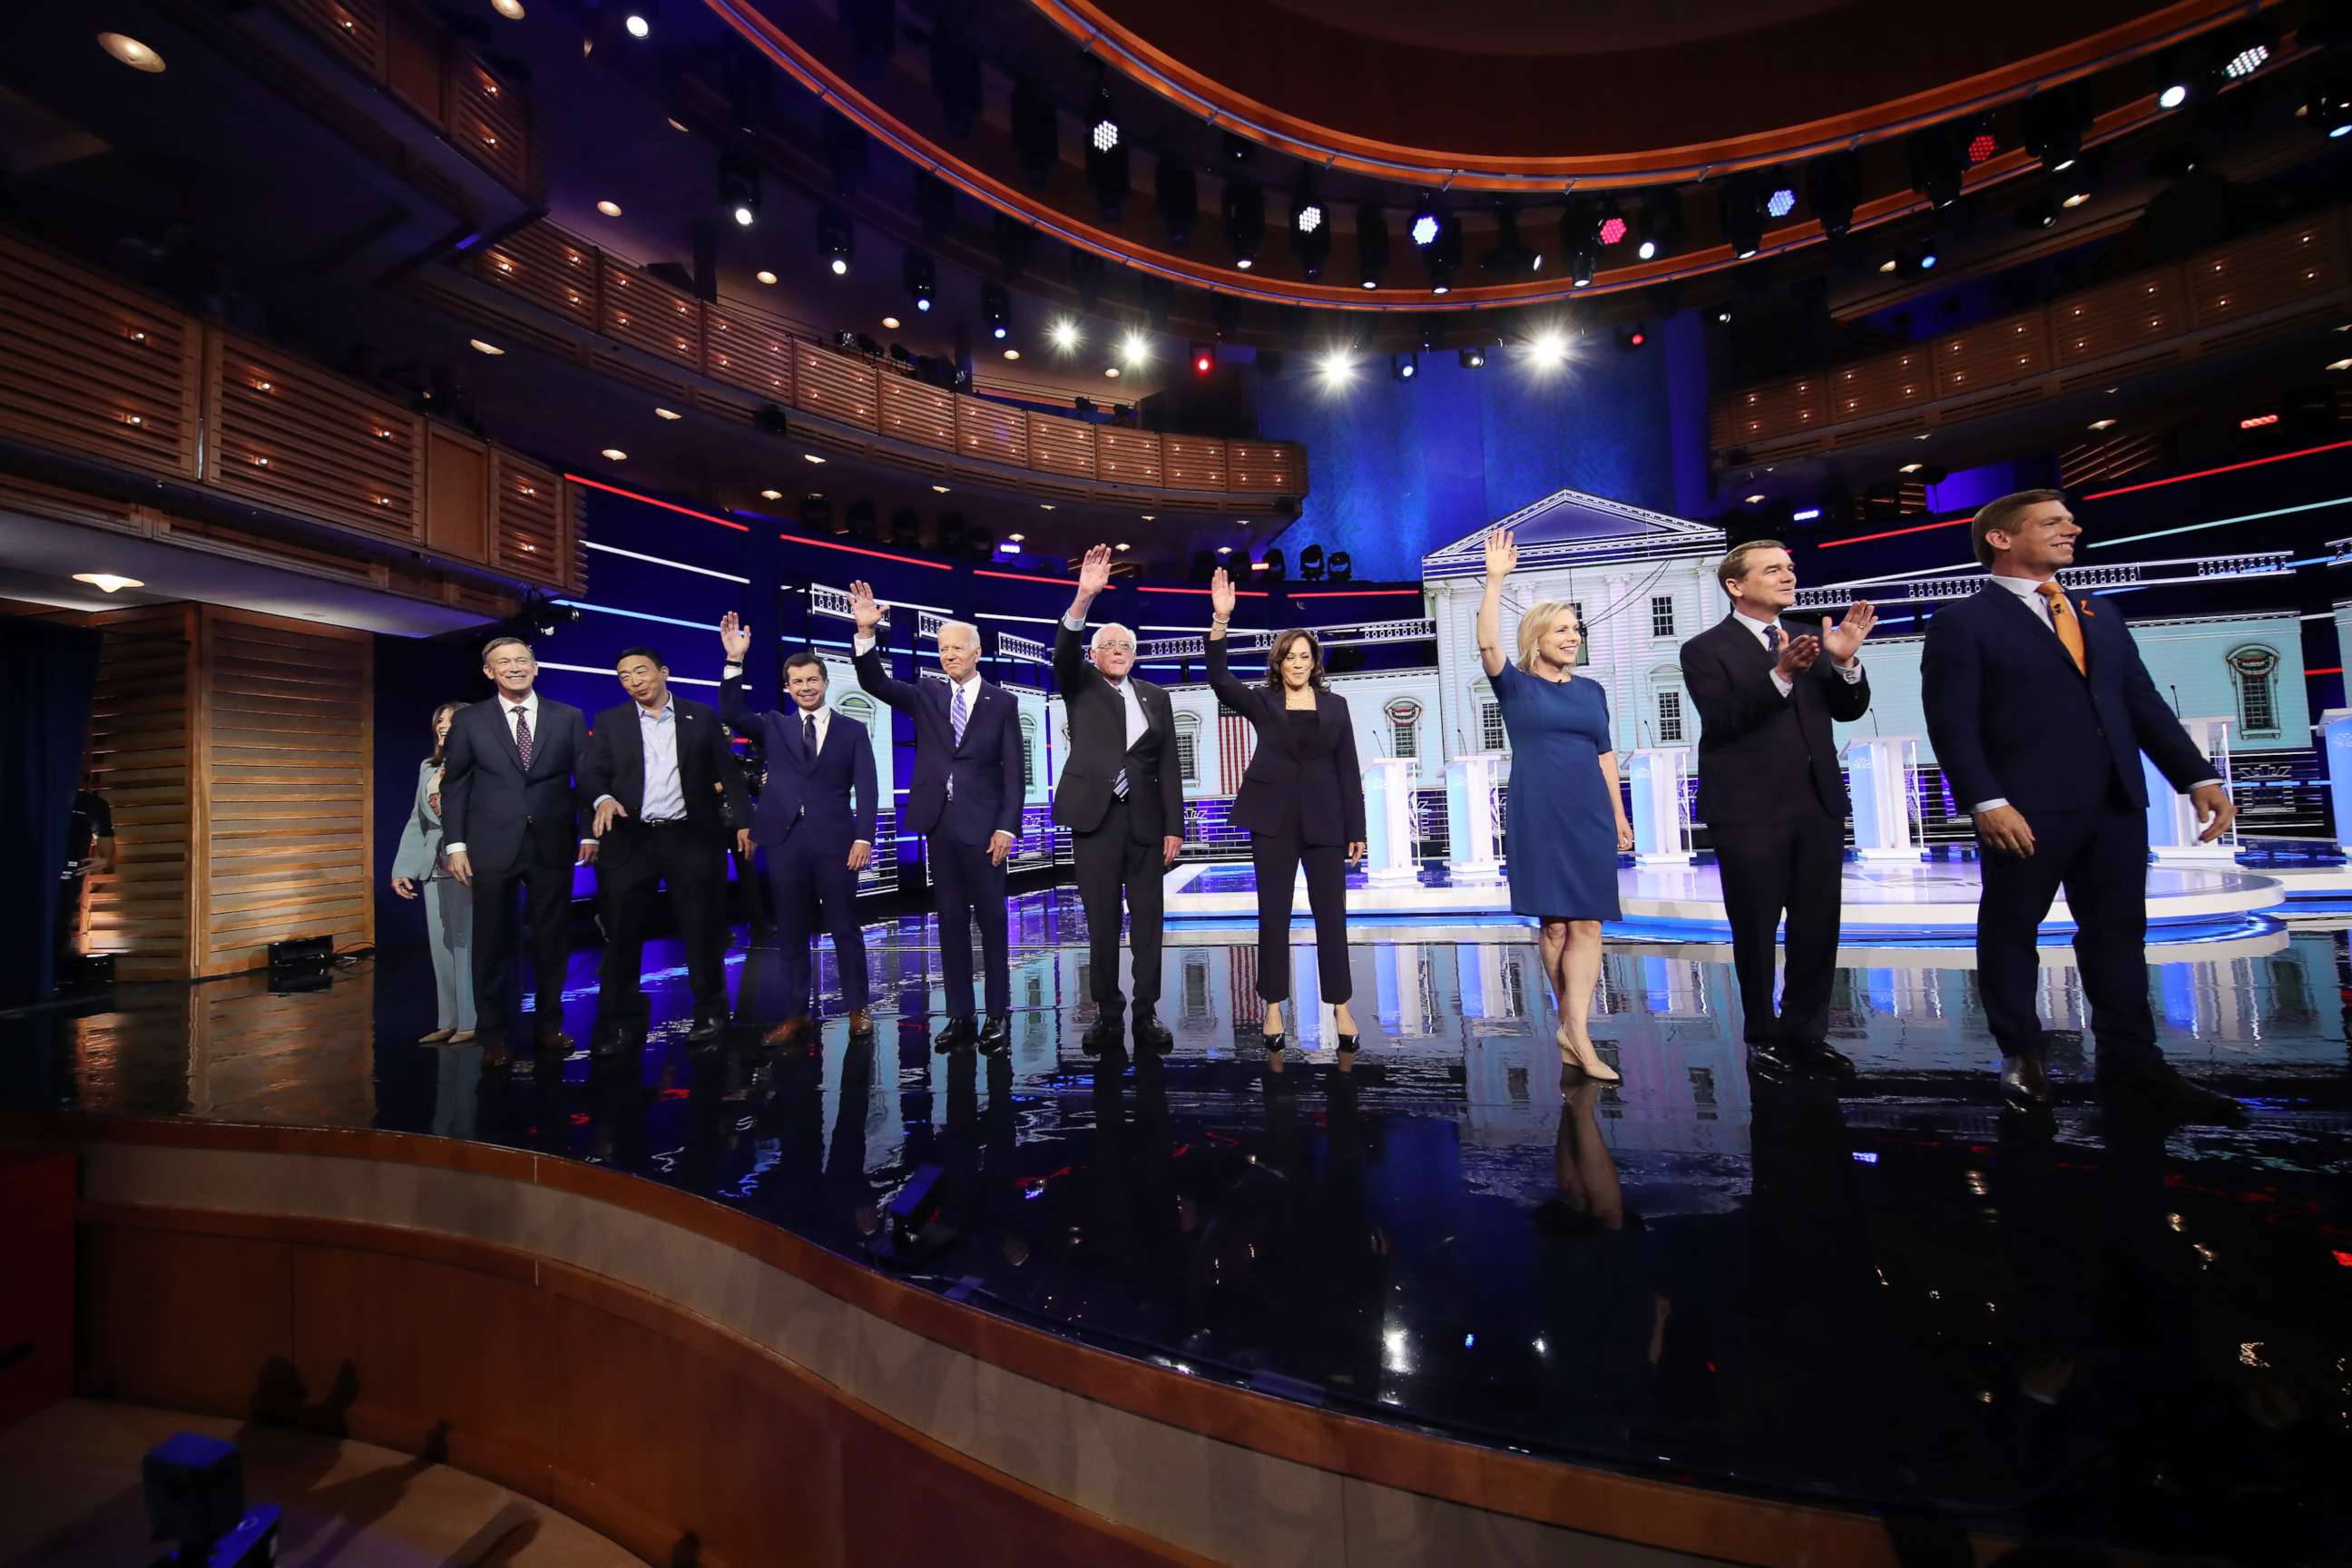 PHOTO: 2020 democratic presidential candidates participate in the second night of the first 2020 democratic presidential debate at the Adrienne Arsht Center for the Performing Arts in Miami, June 27, 2019.